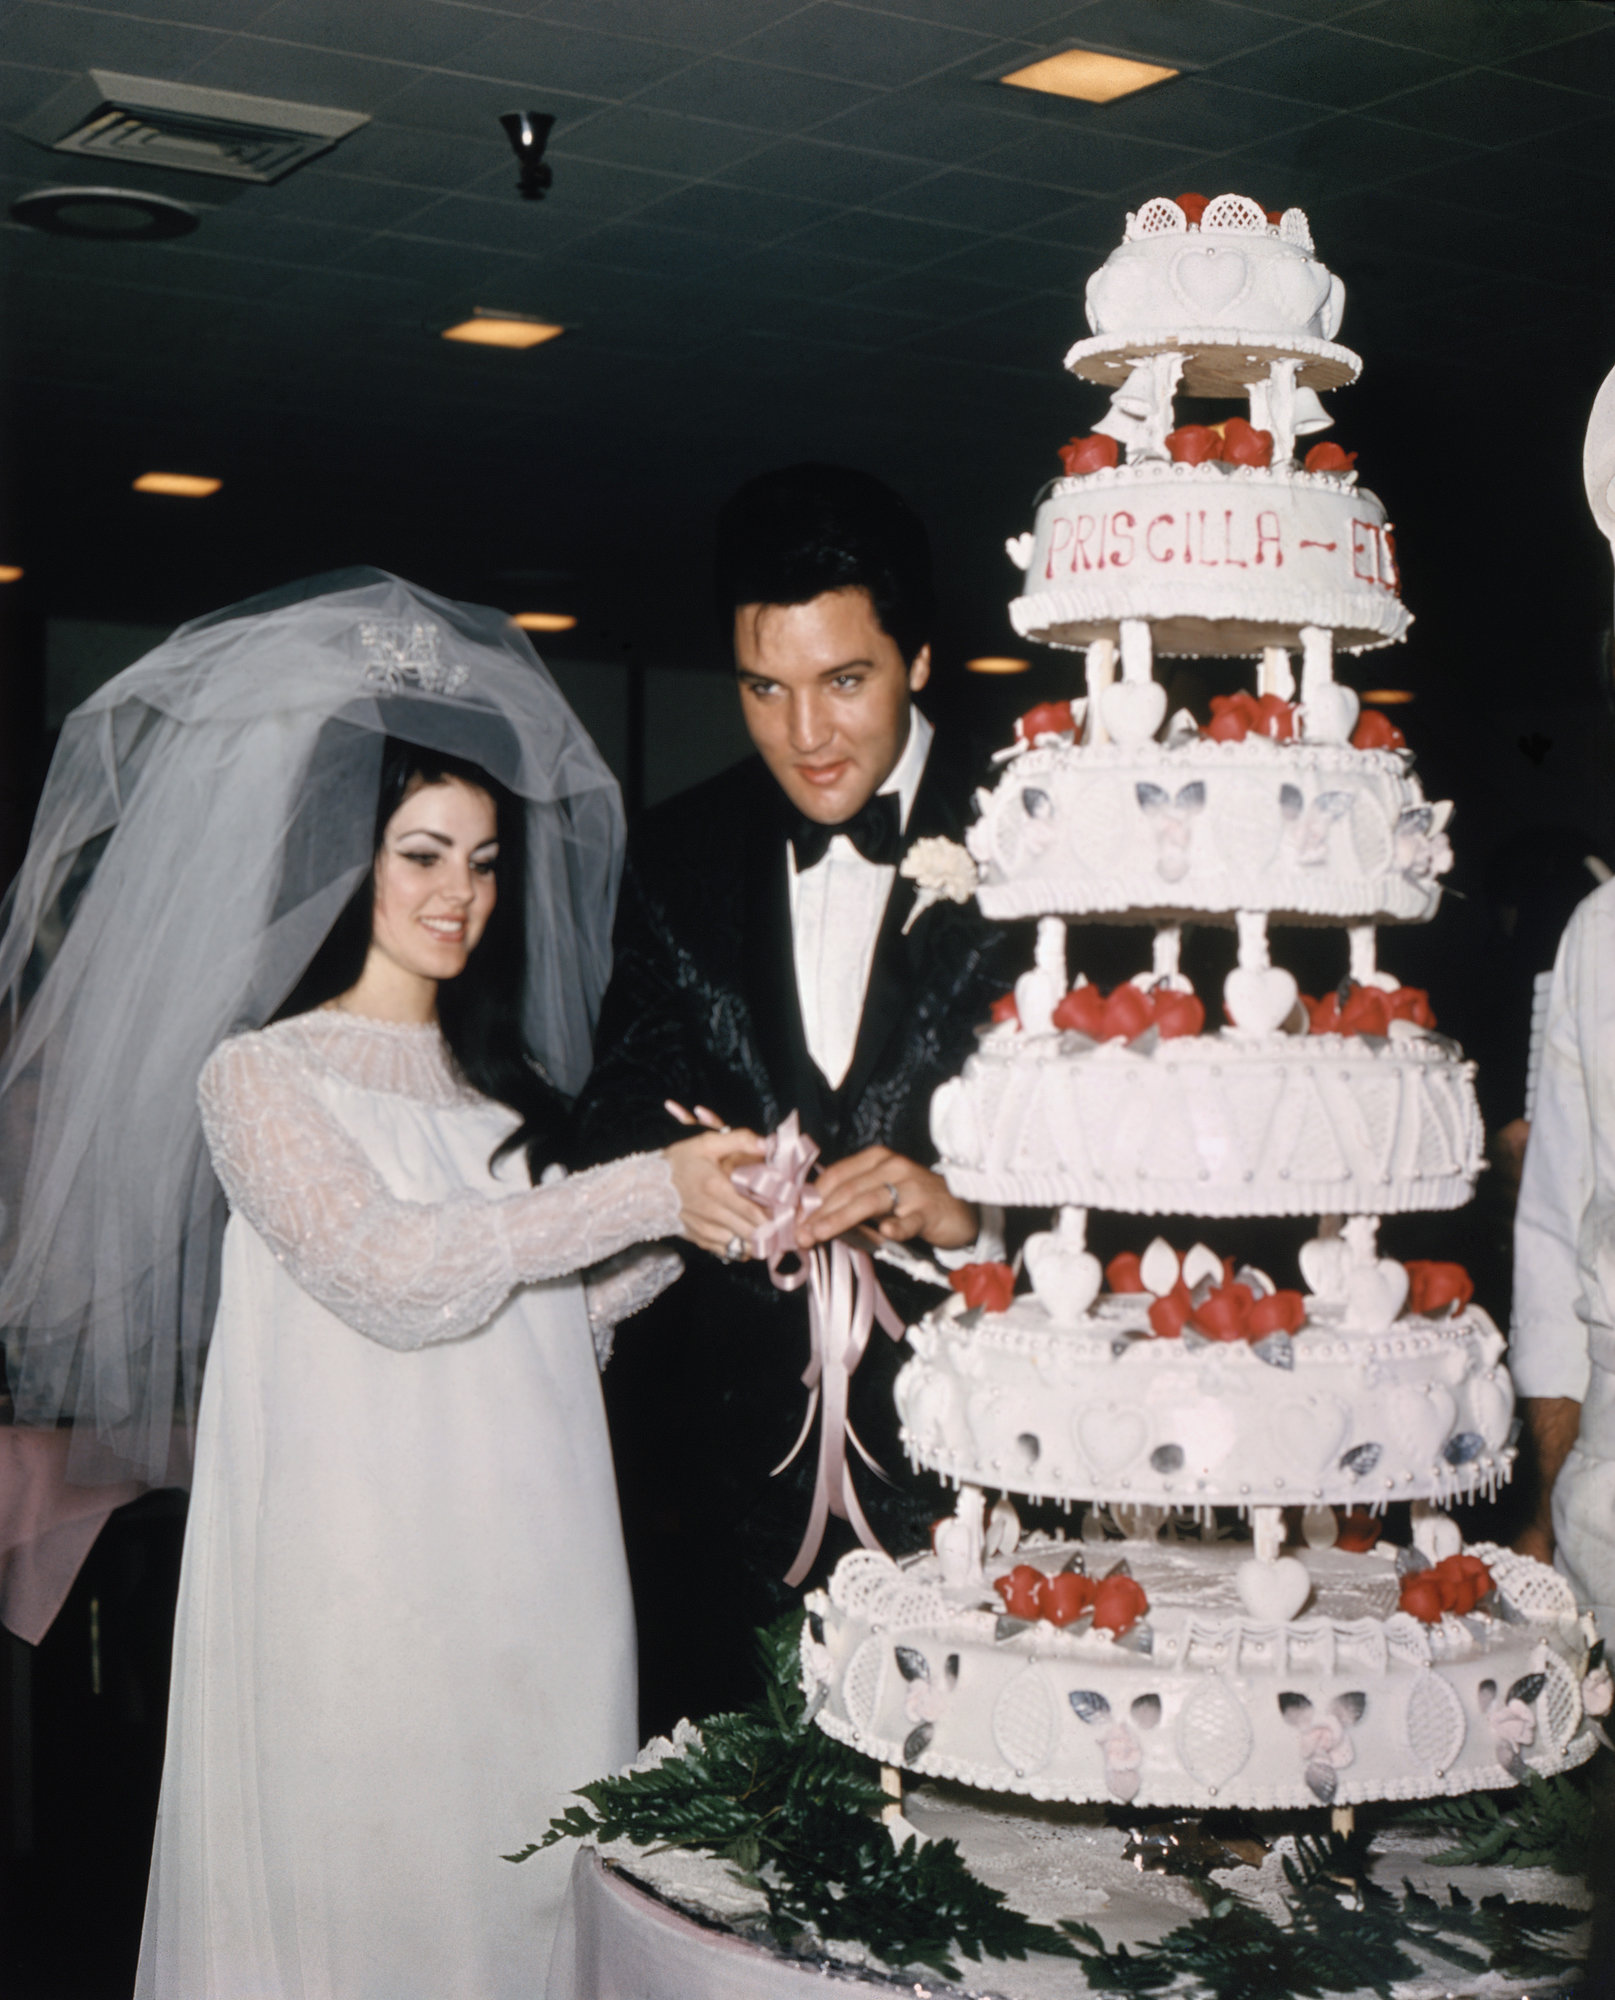 Tribeca Citizen | Sylvia Weinstock, whose cakes became the stars of many  celebrity weddings, has died at 91